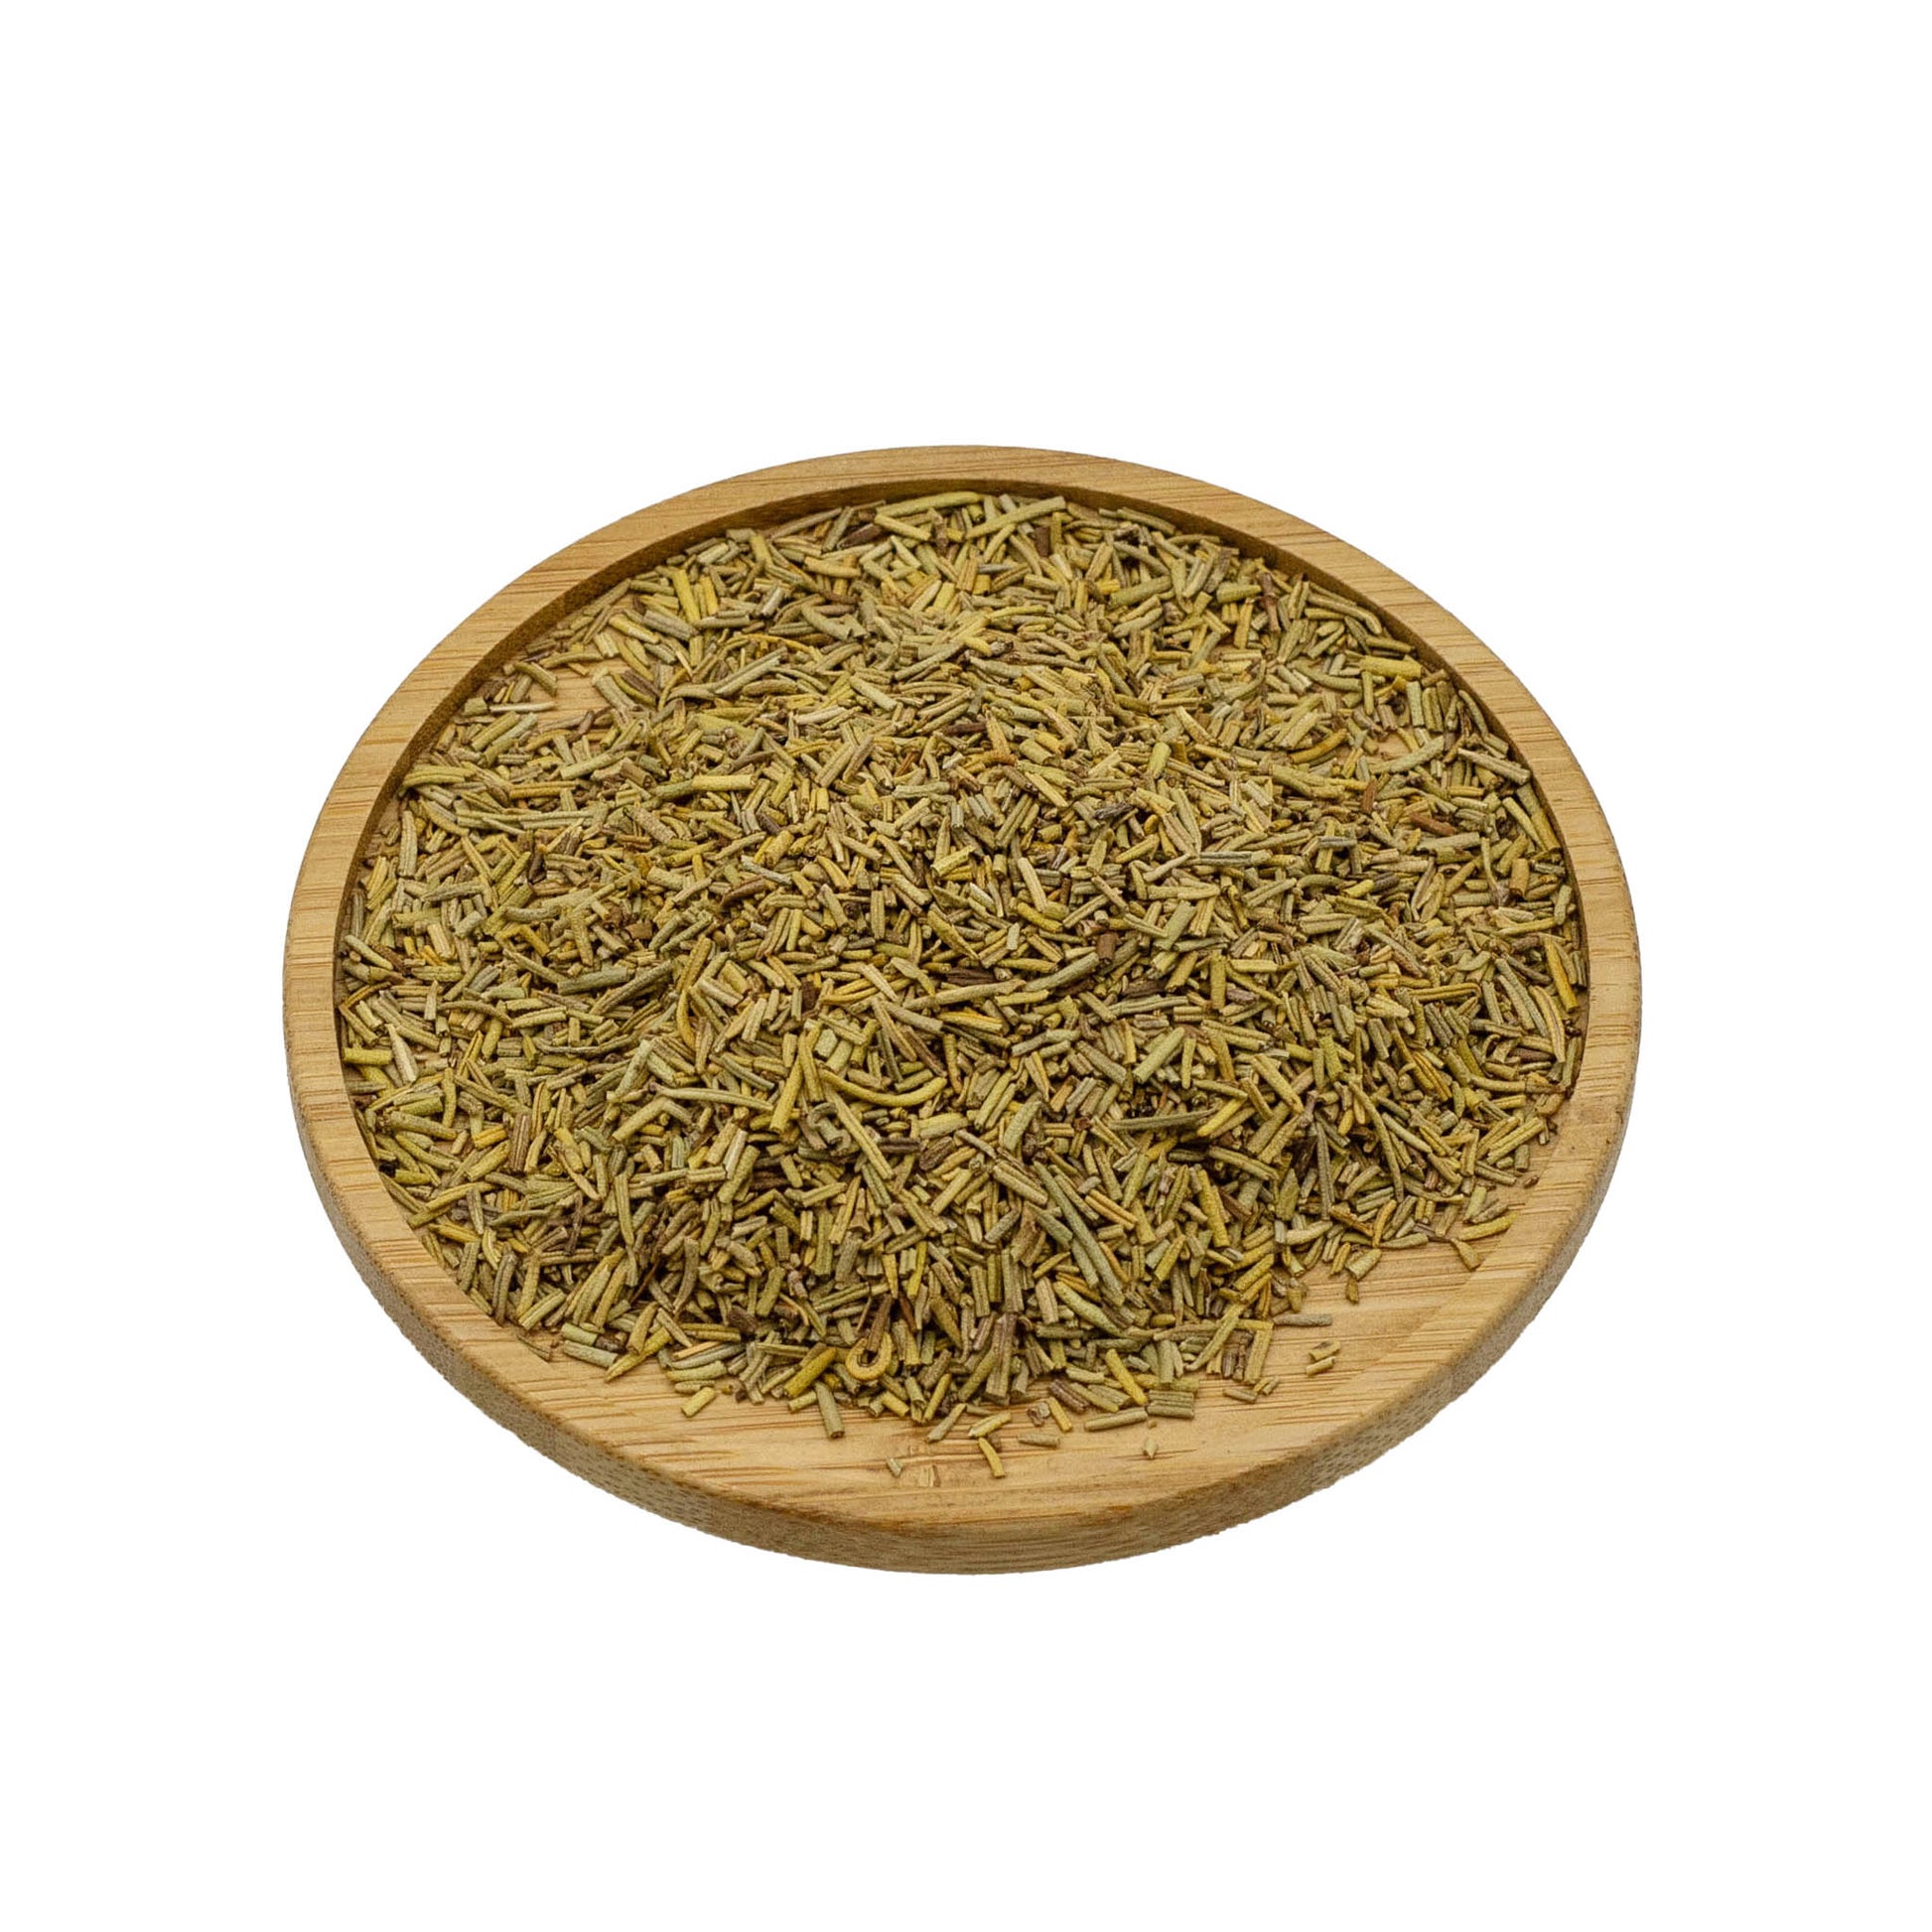 200g bag of dried rosemary